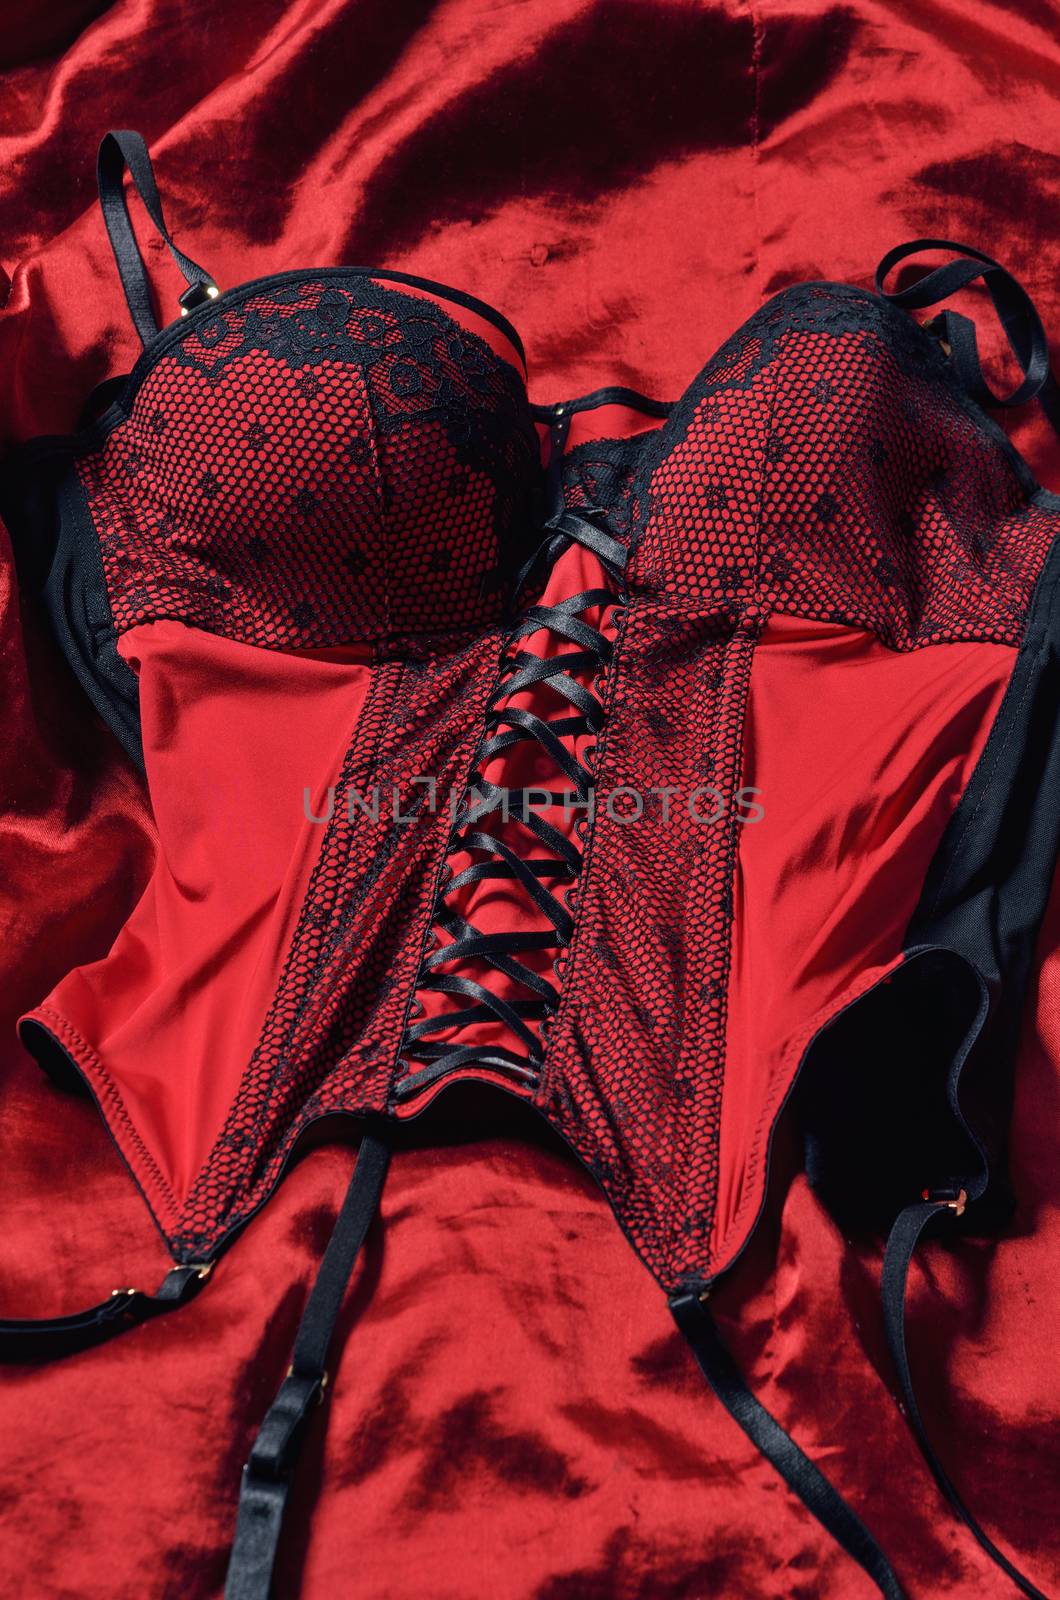 Red corset decorated with black lace